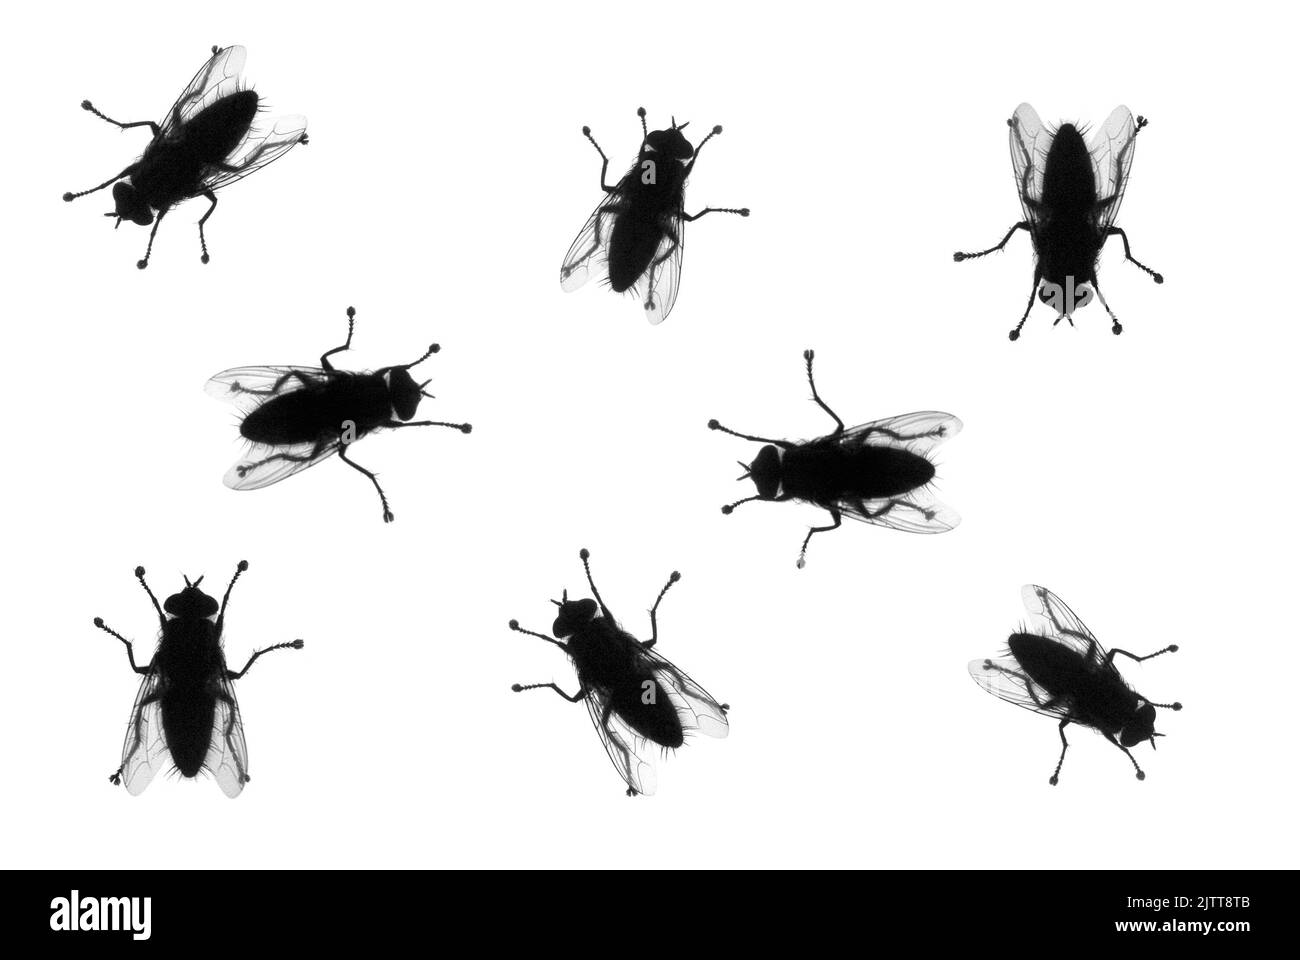 Common houseflies Musca domestica in various positions, silhouette isolated on white cut out Stock Photo